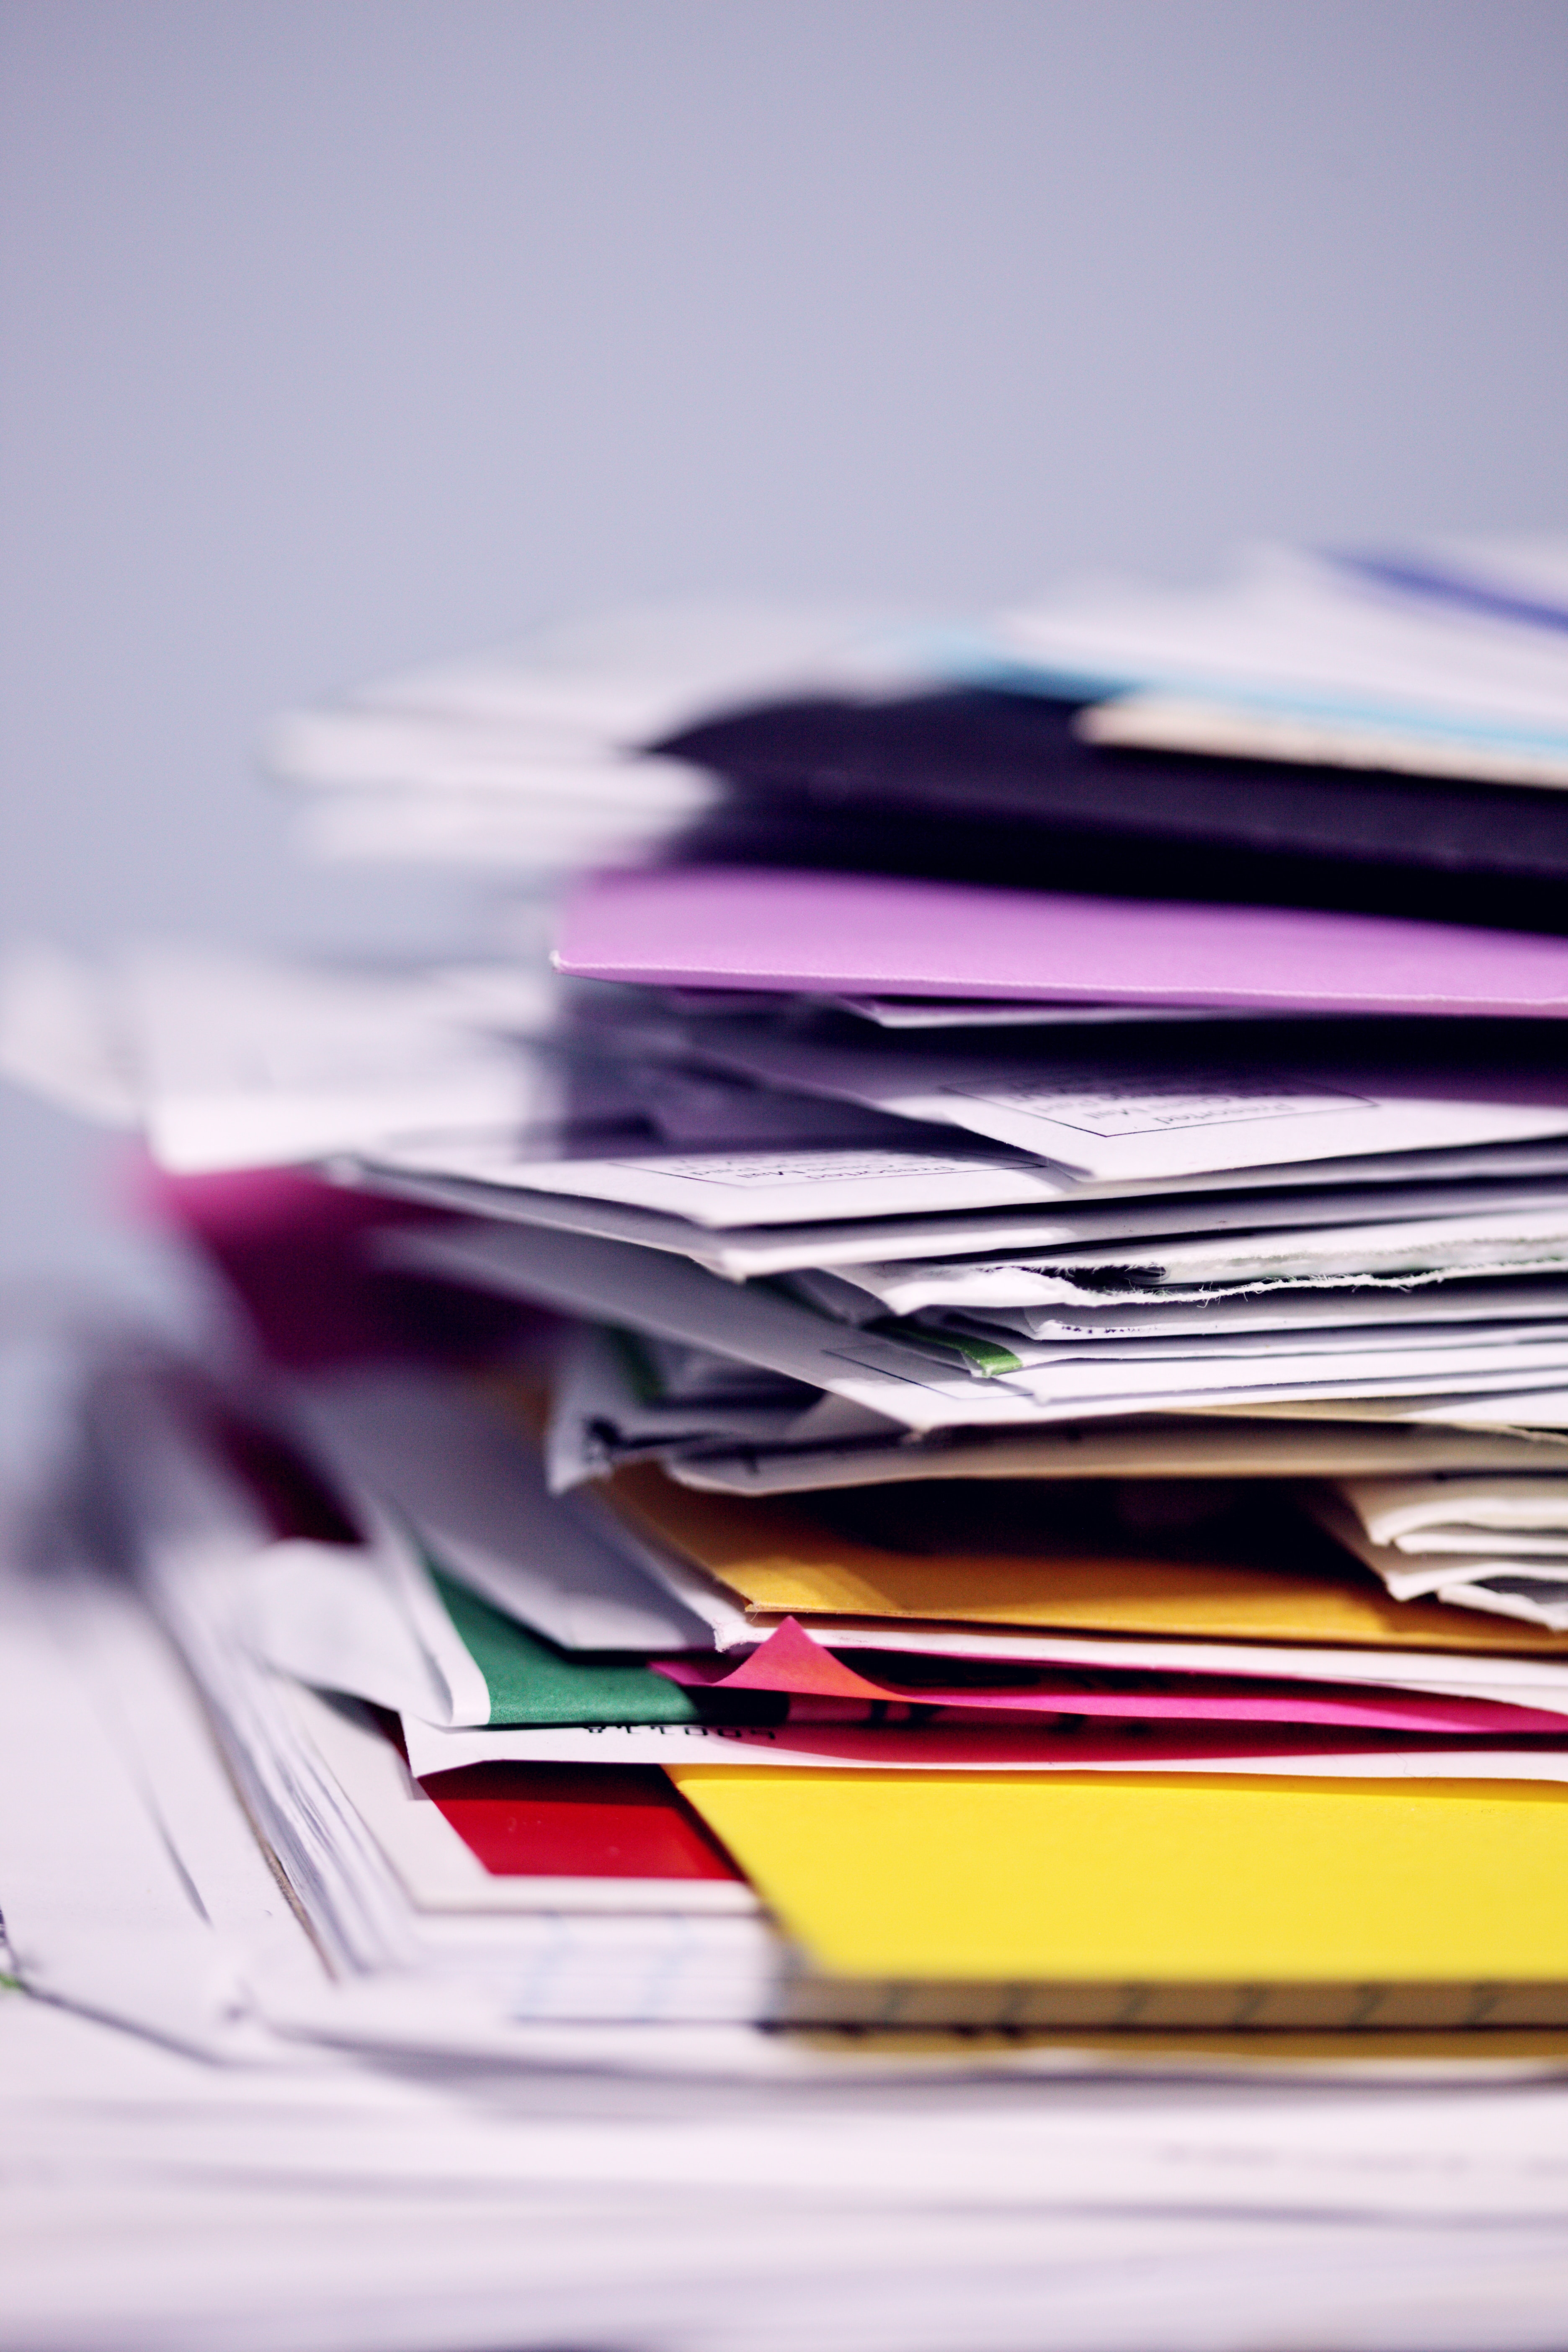 Tax Season Tips: Set up a strong filing system